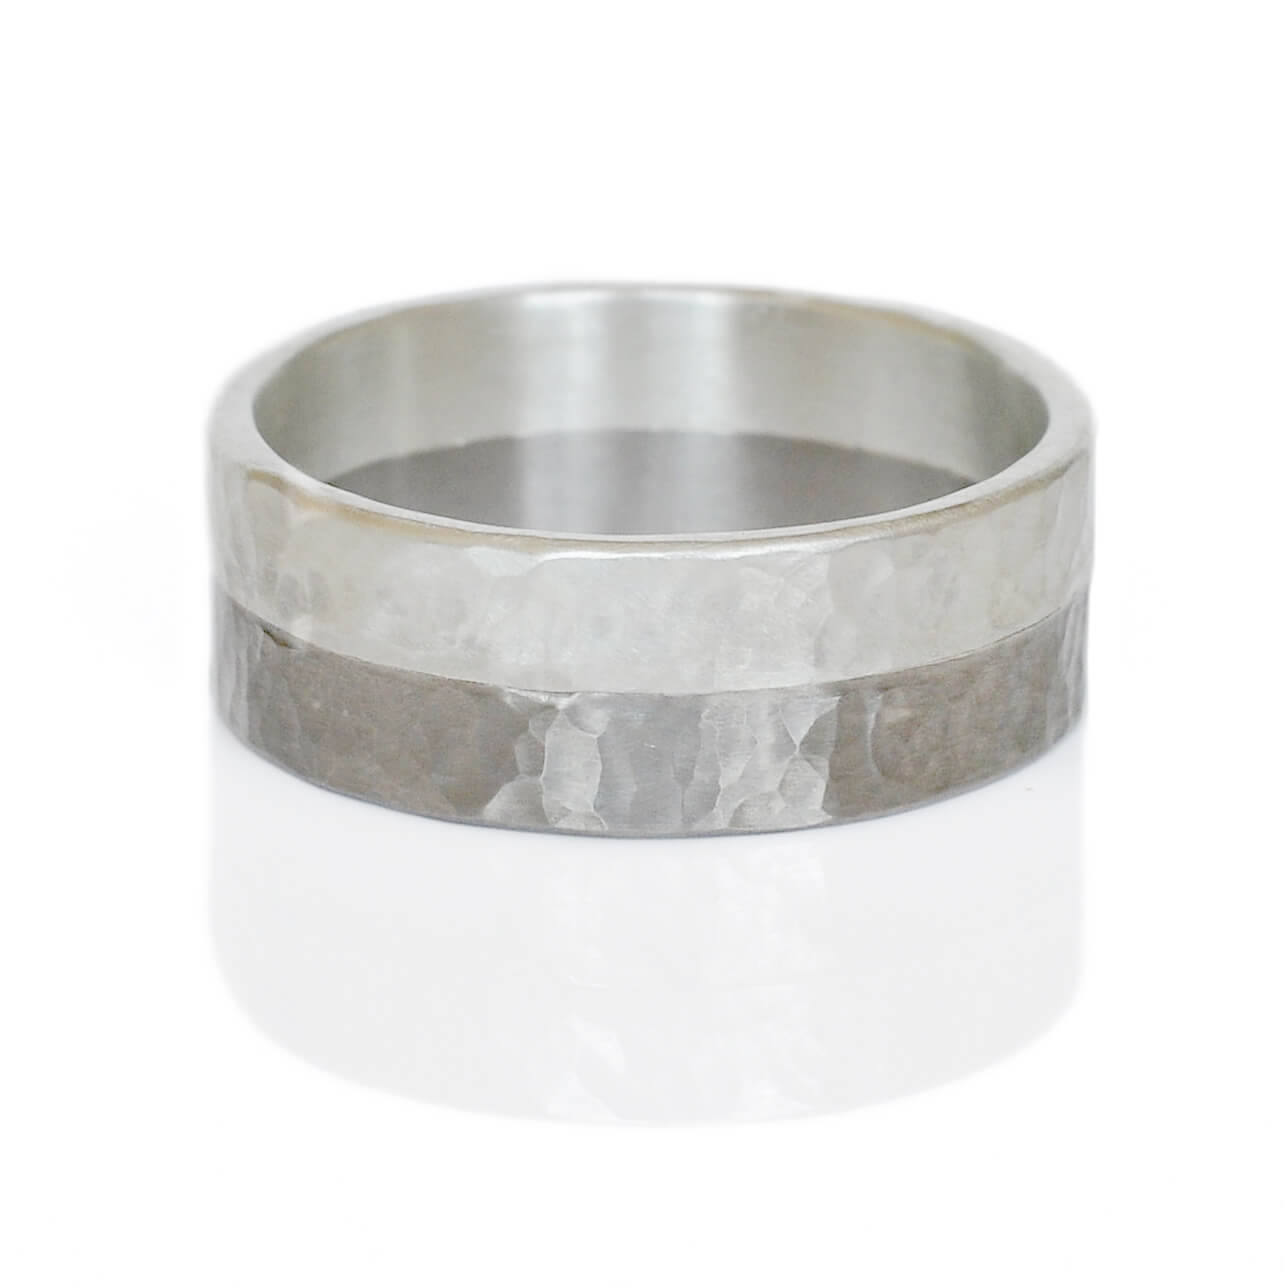 8mm Wide Band in Hammered Palladium and Hammered Sterling Silver